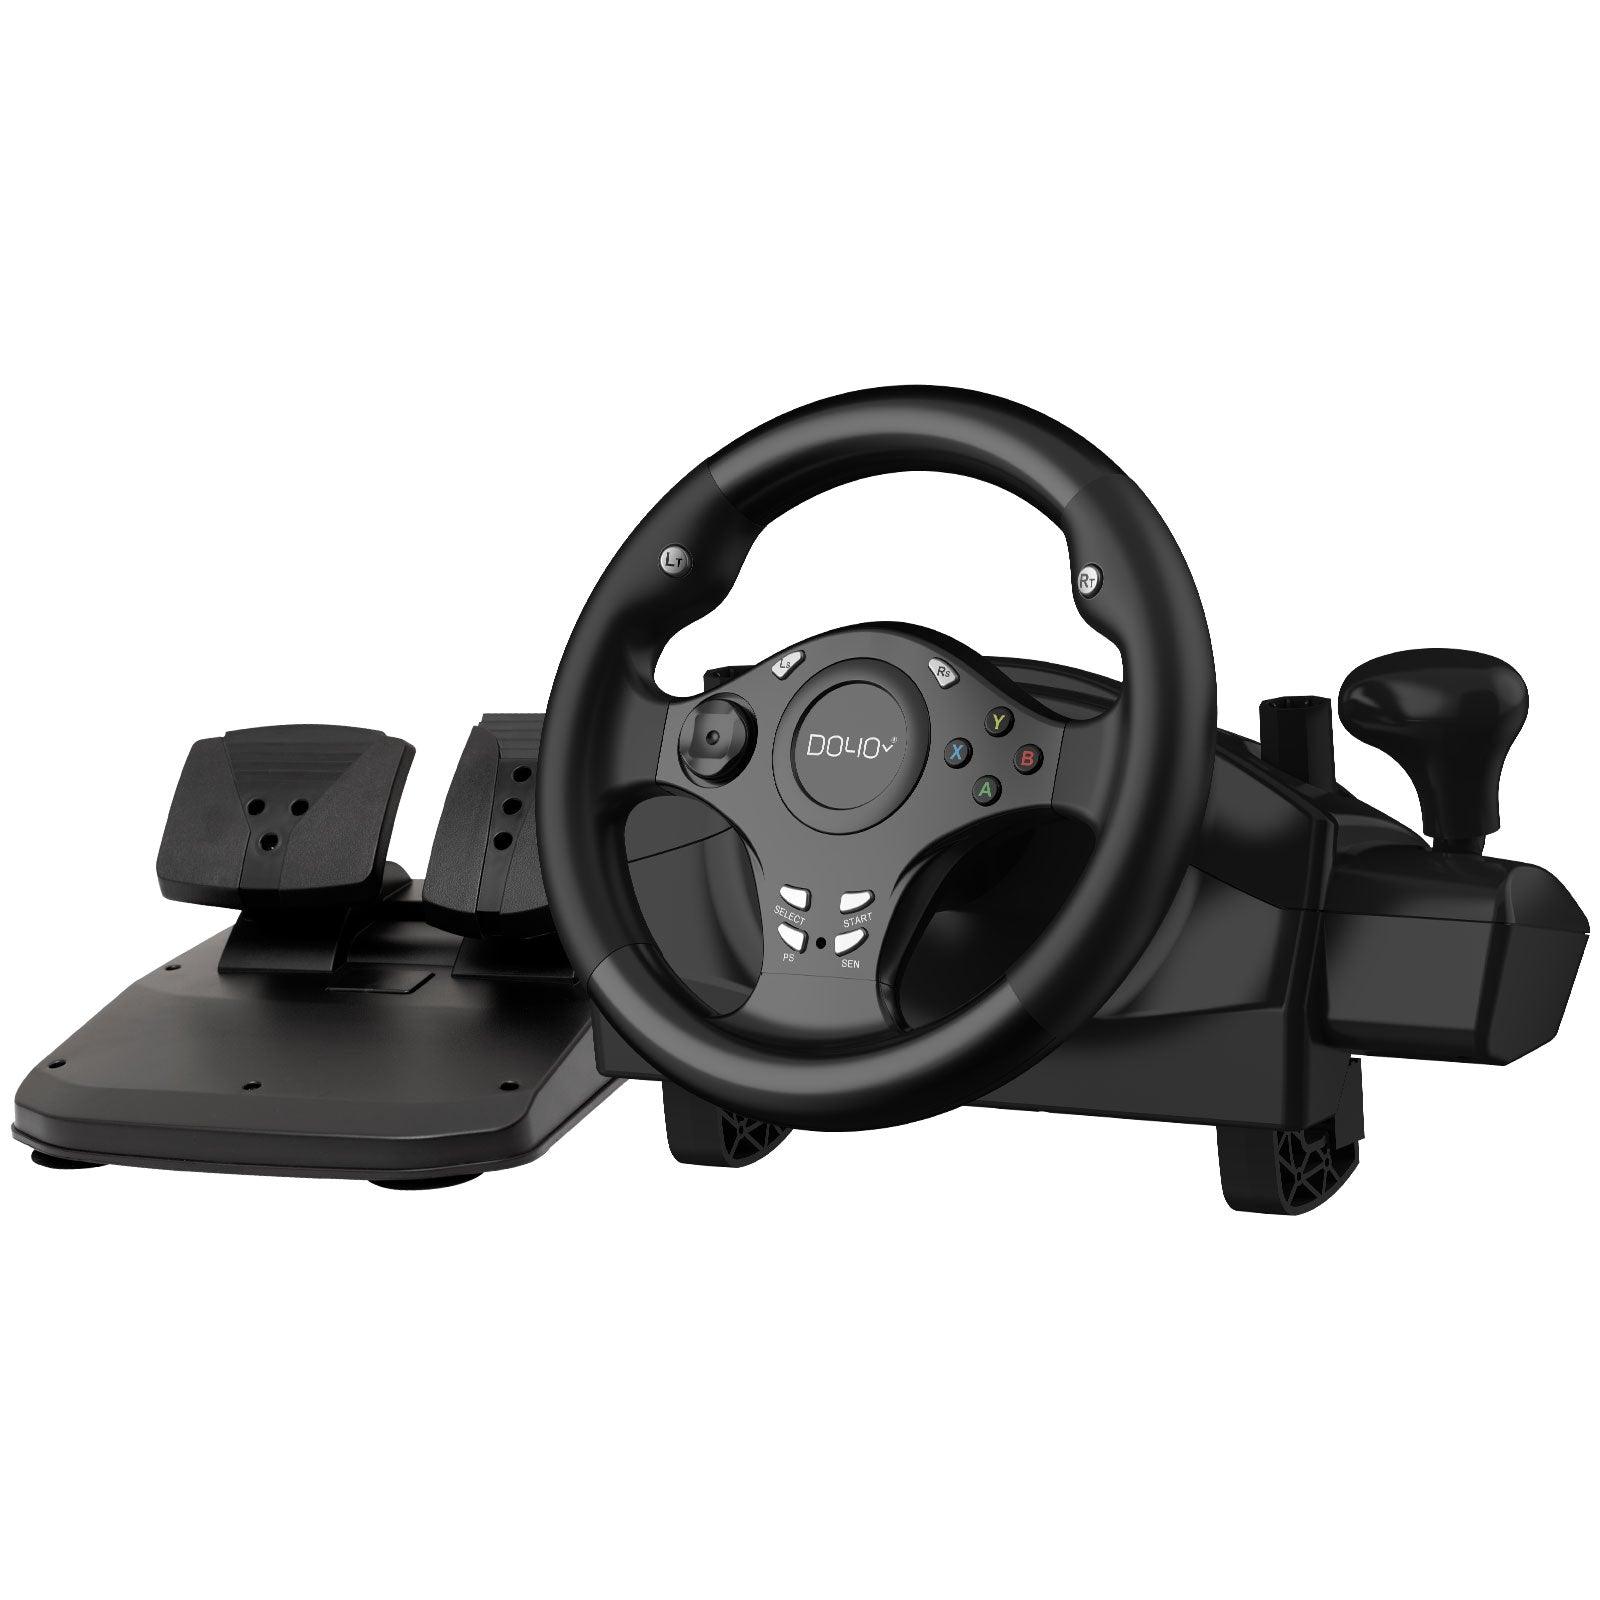 Racing Steering Wheel Stand Fit For PC PS4 Adjustable Racing